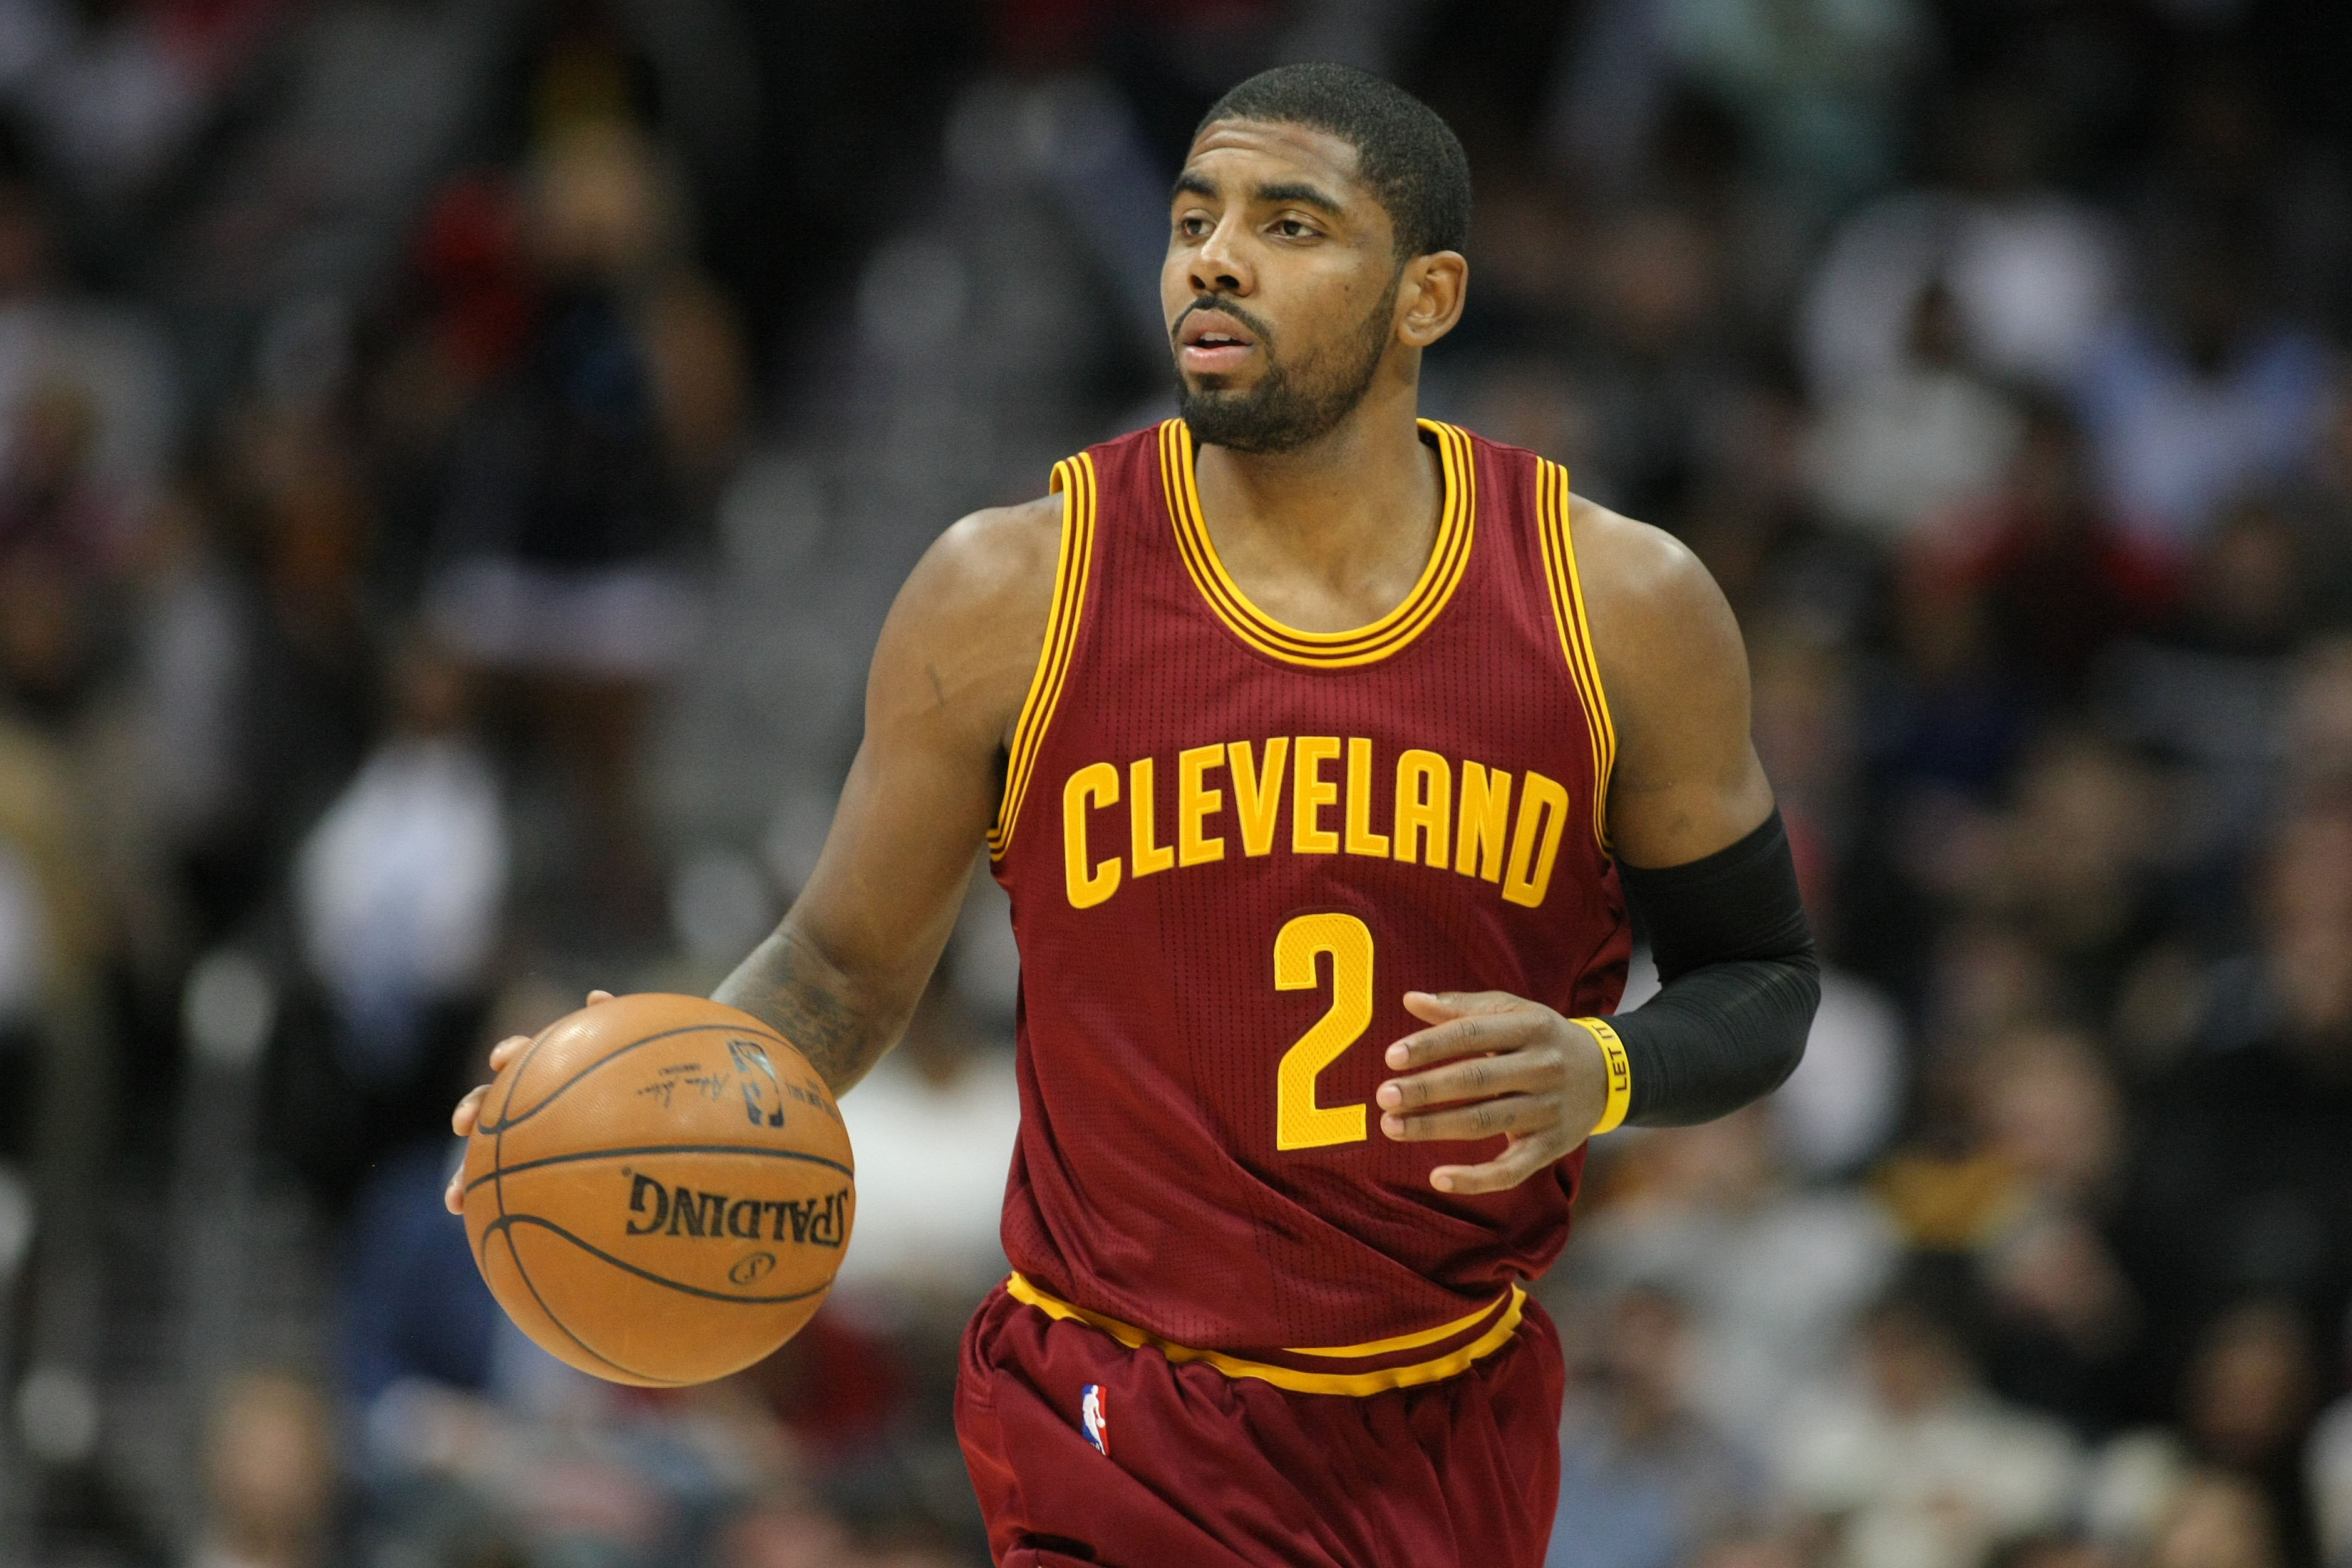 Kyrie Irving #16